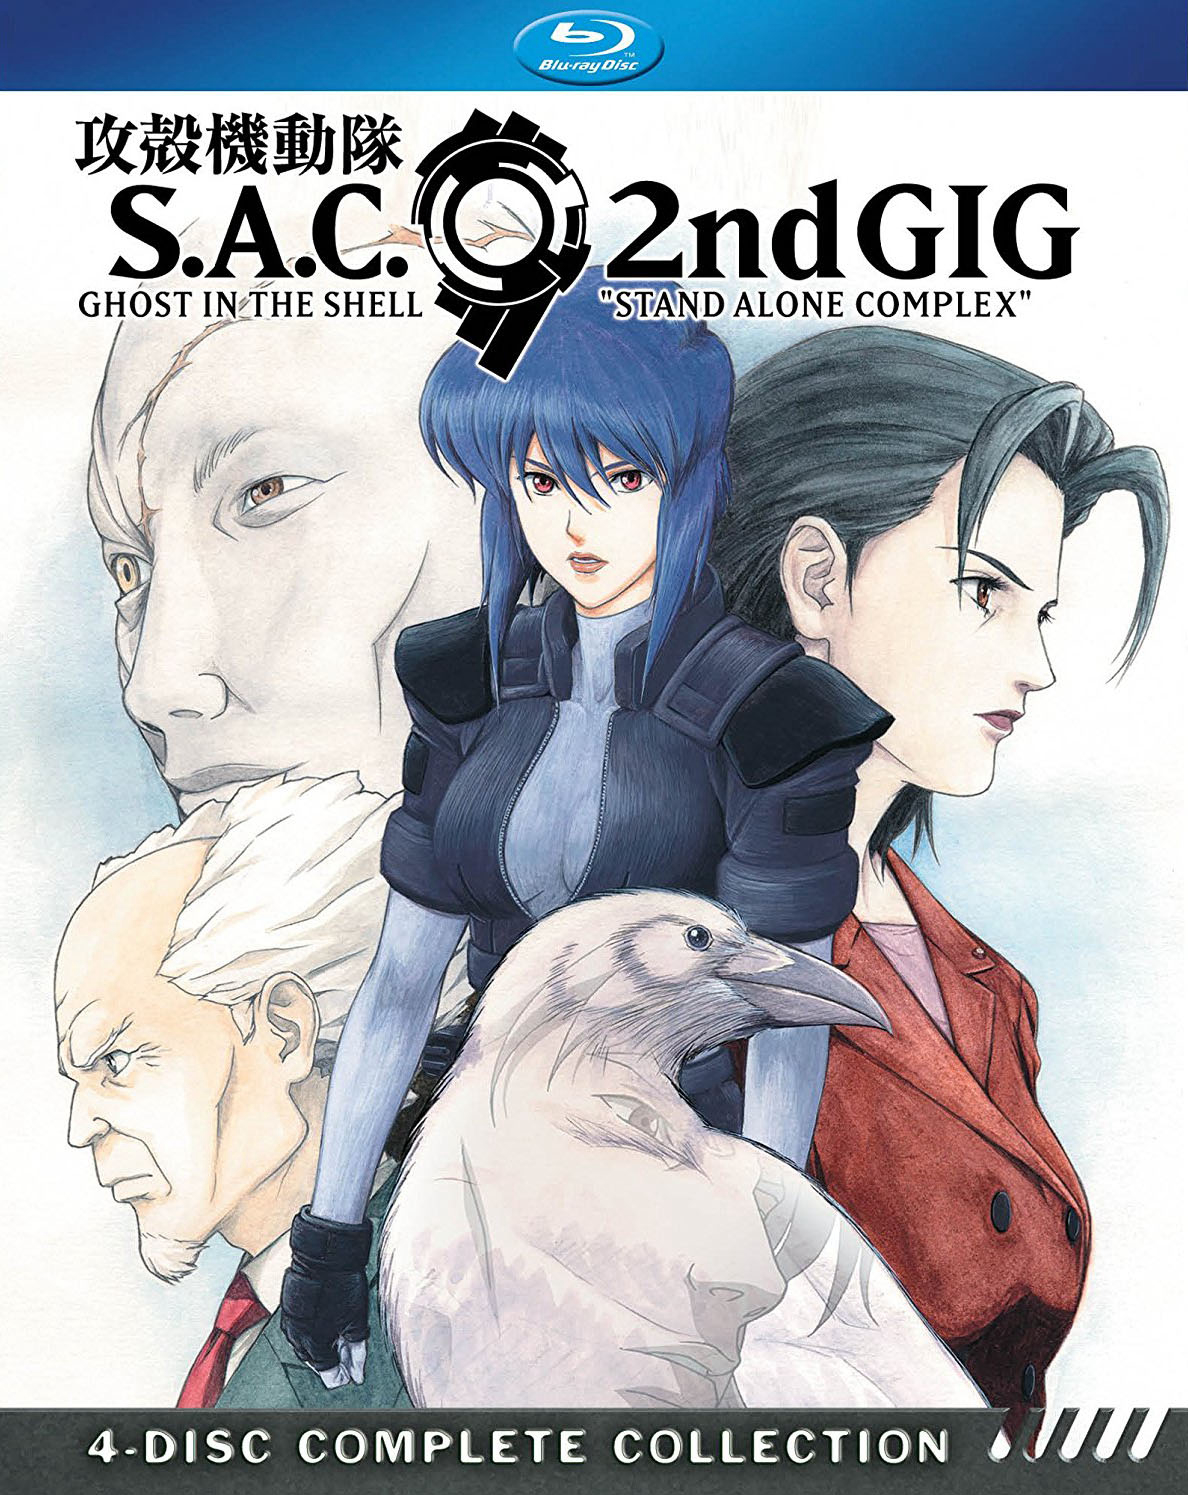 Vỏ bọc ma: Stand Alone Complex (Phần 2) - Ghost in the Shell: Stand Alone Complex (Season 2)